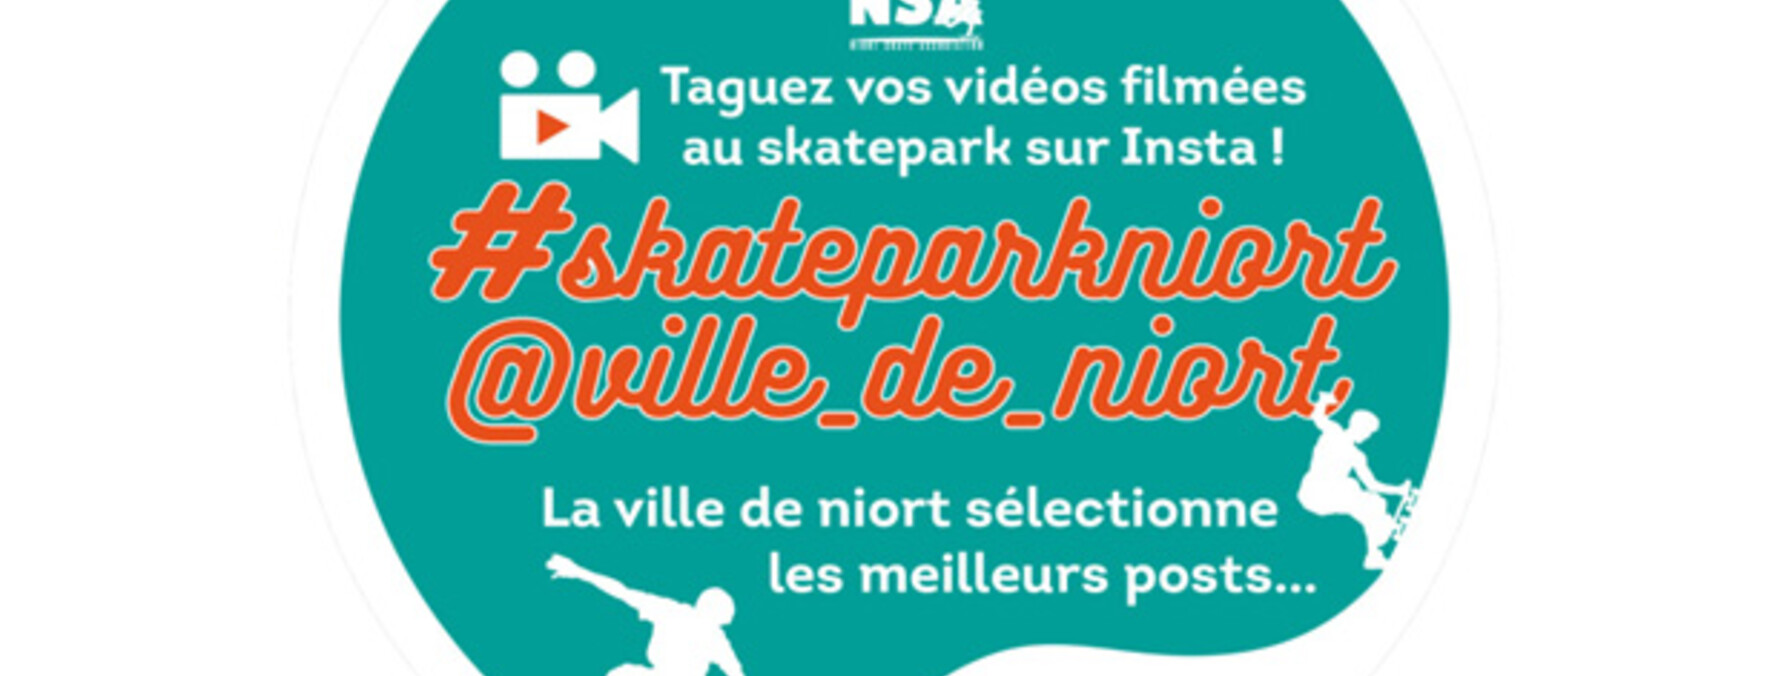 Concours Skate